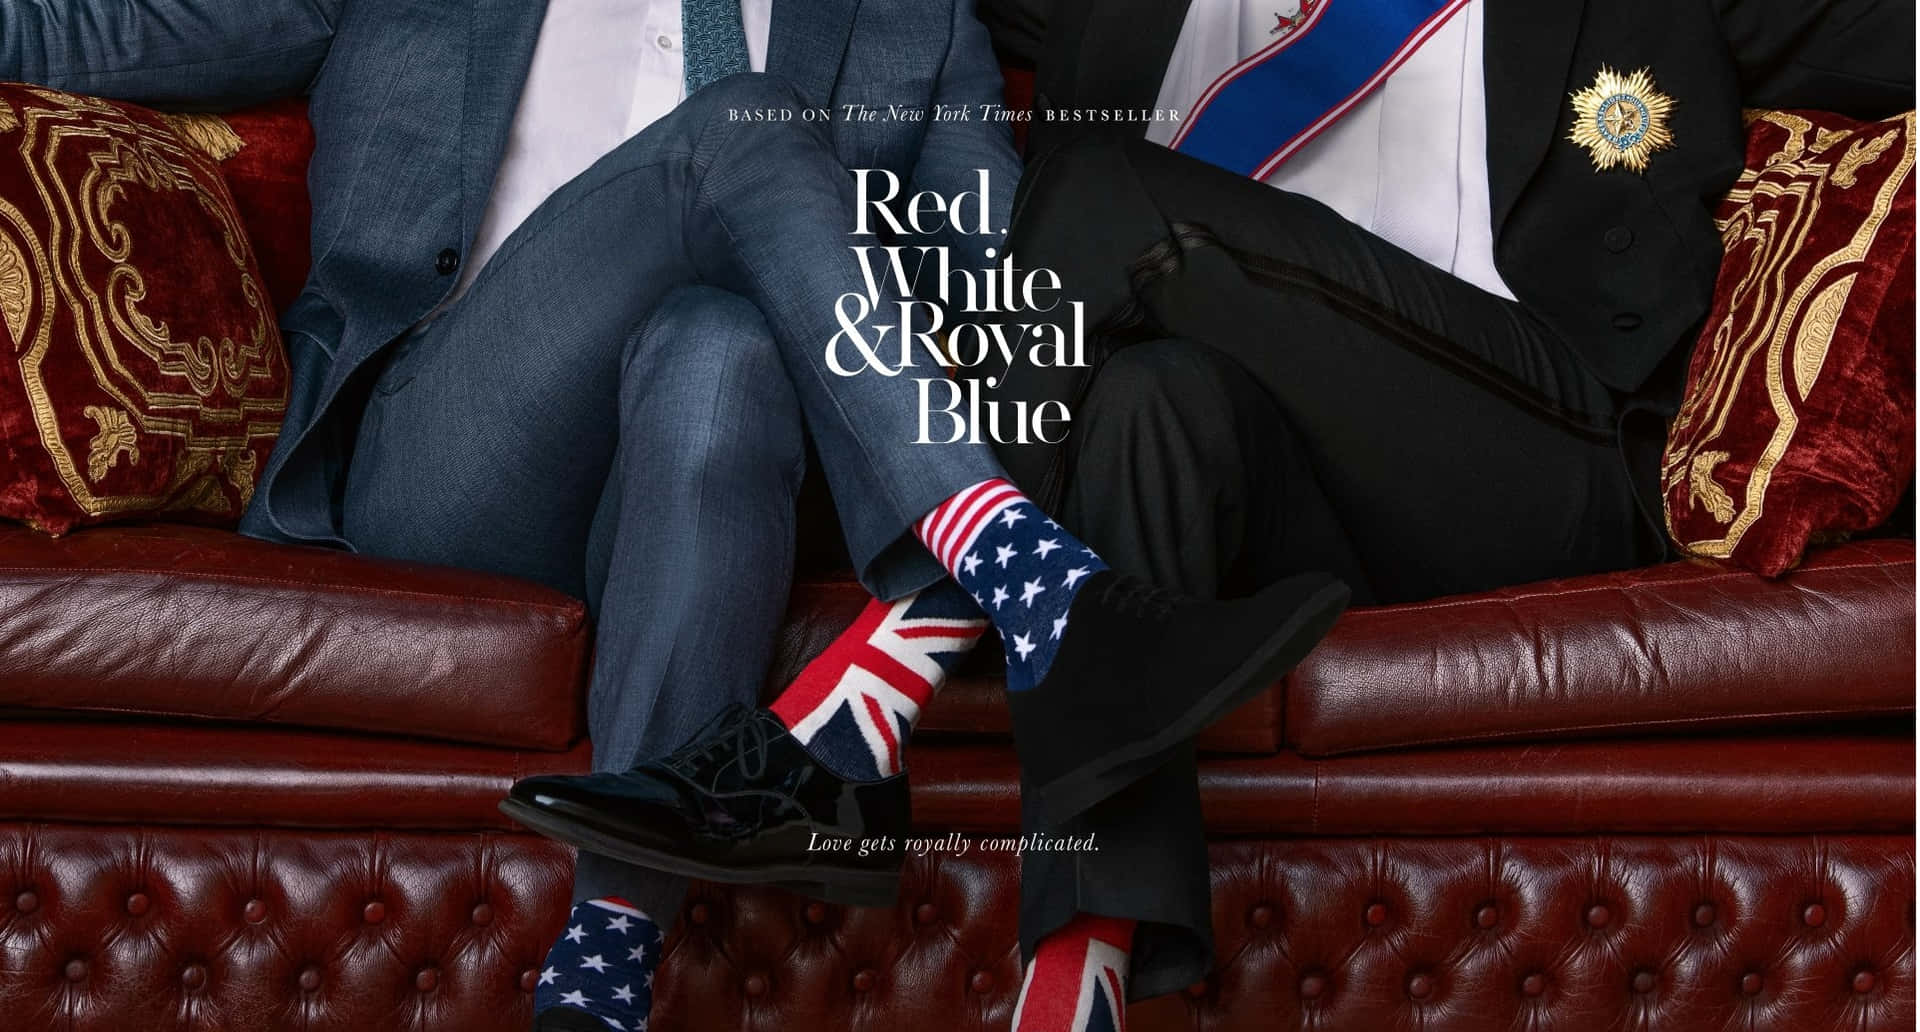 Red White Royal Blue Promotional Poster Wallpaper